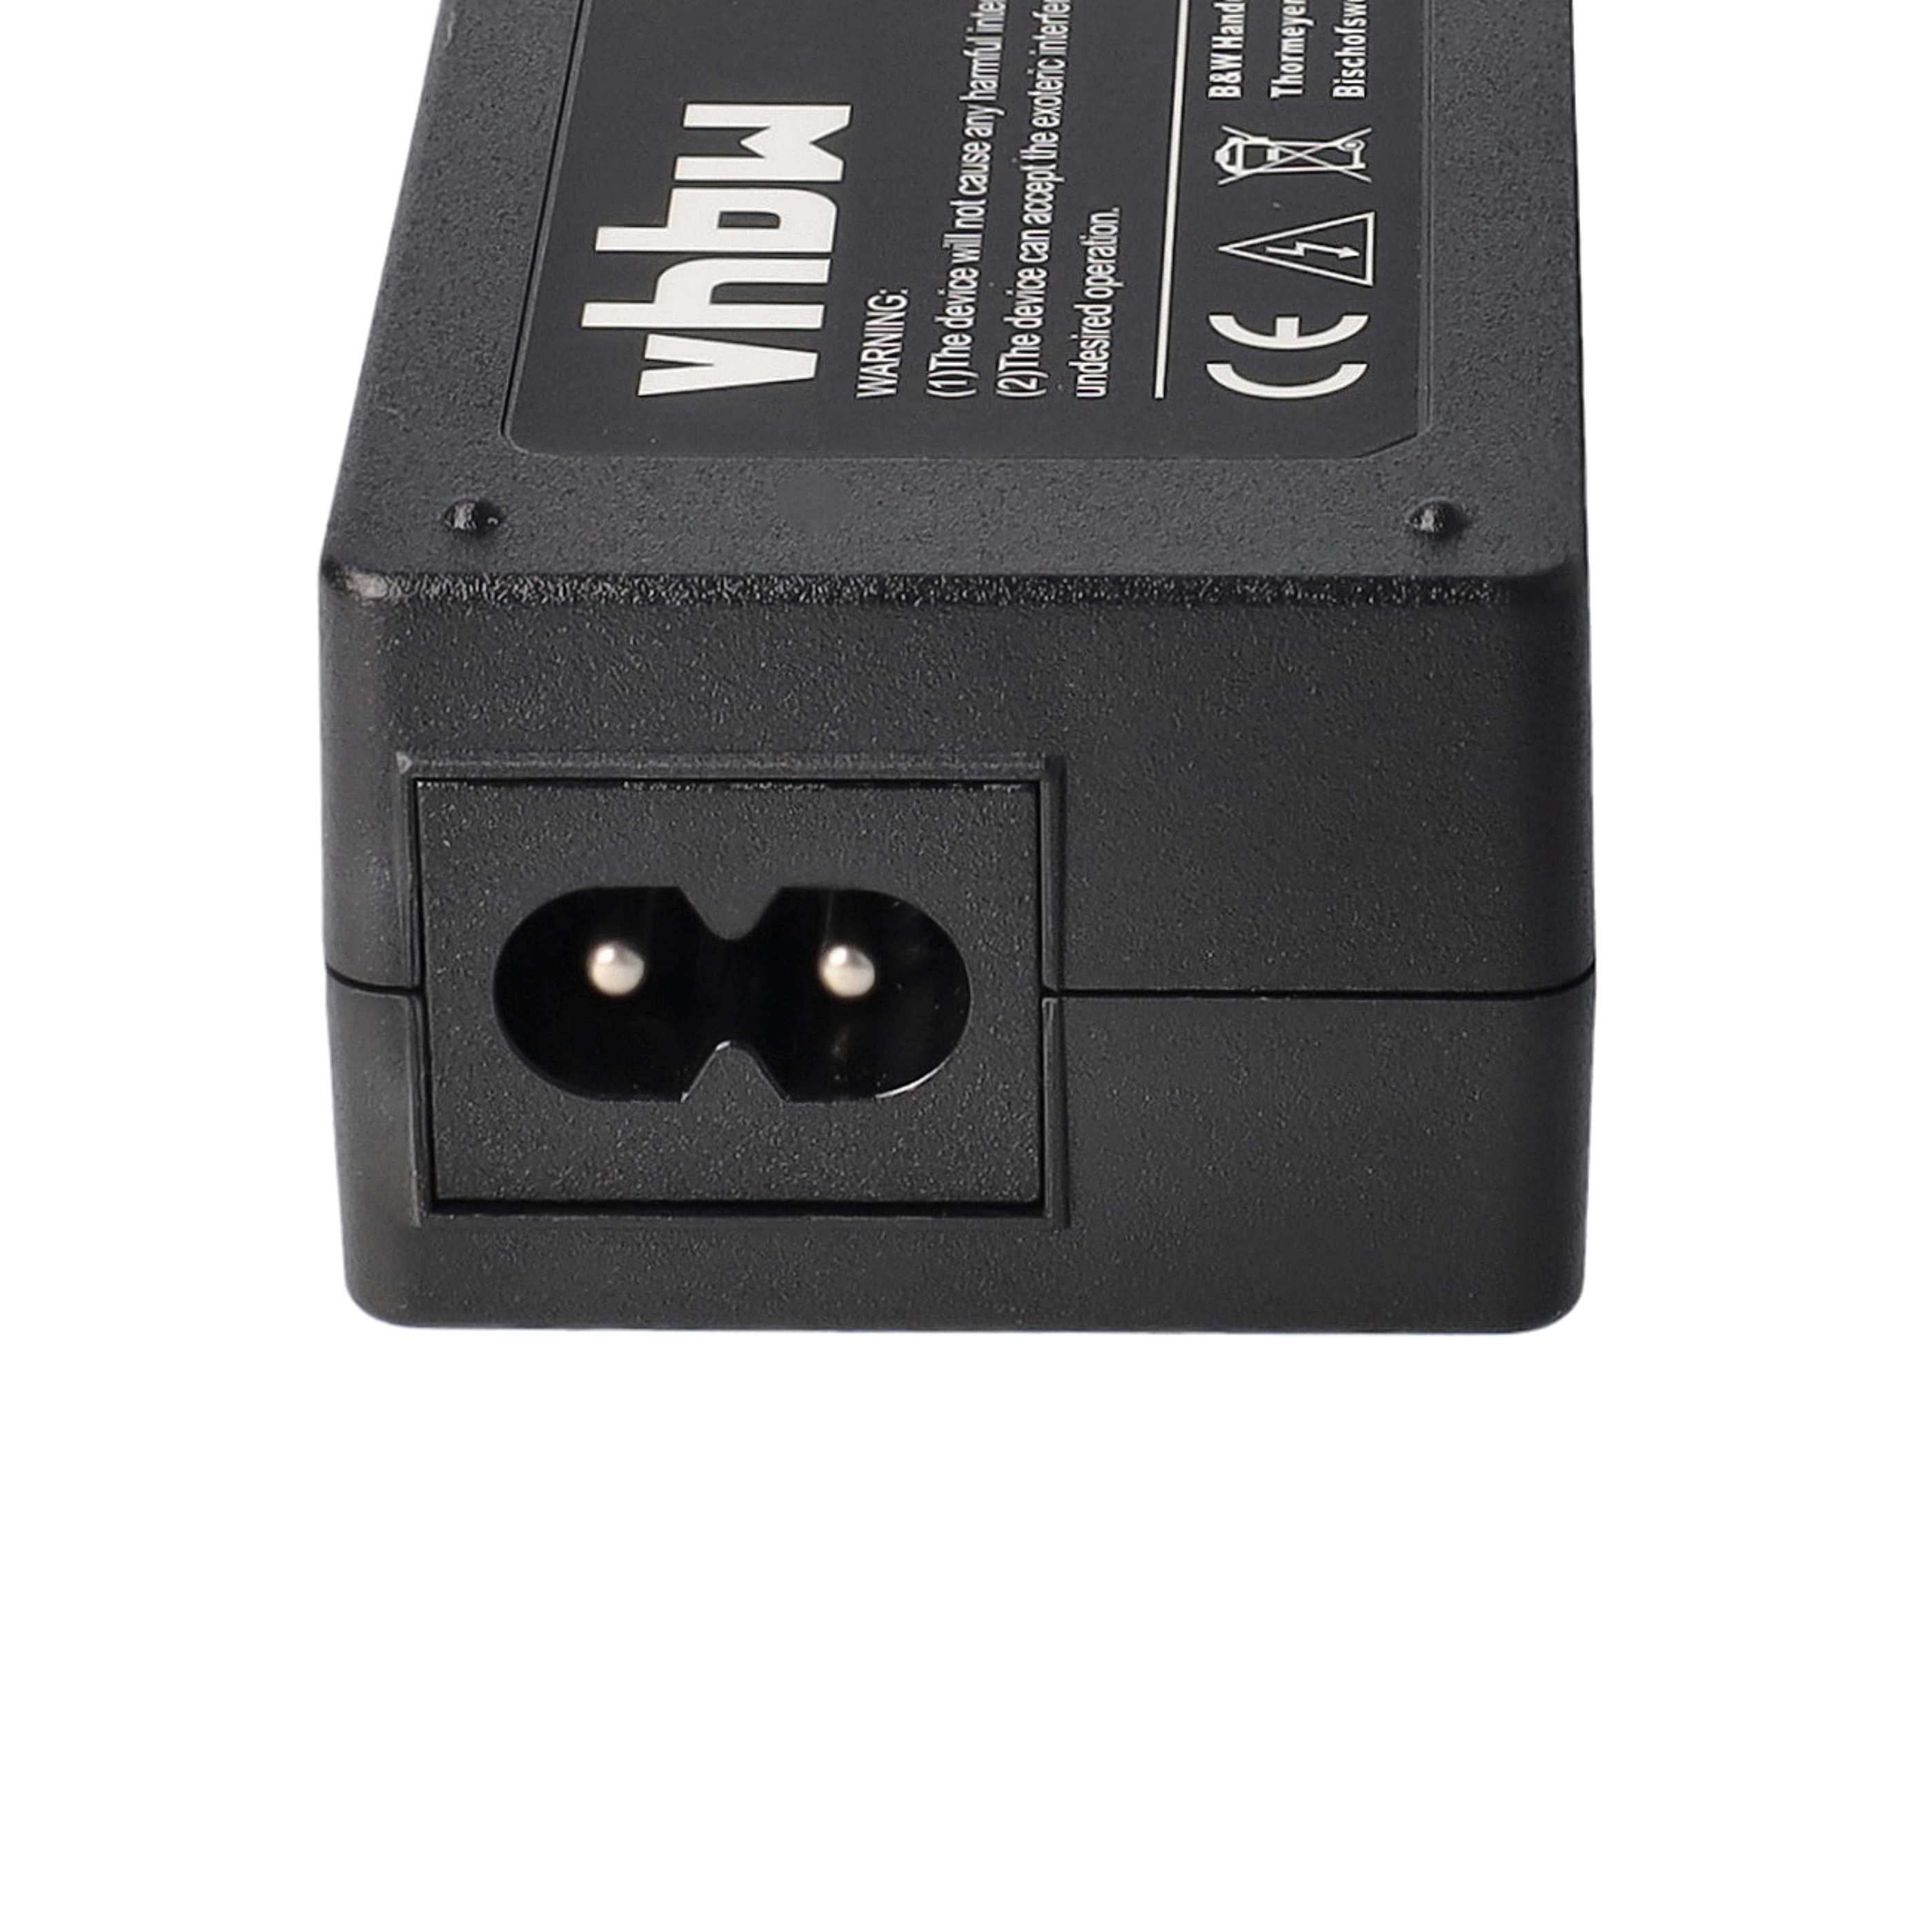 Mains Power Adapter replaces Acer BRA-6012WW for US LogicNotebook etc., 60 W